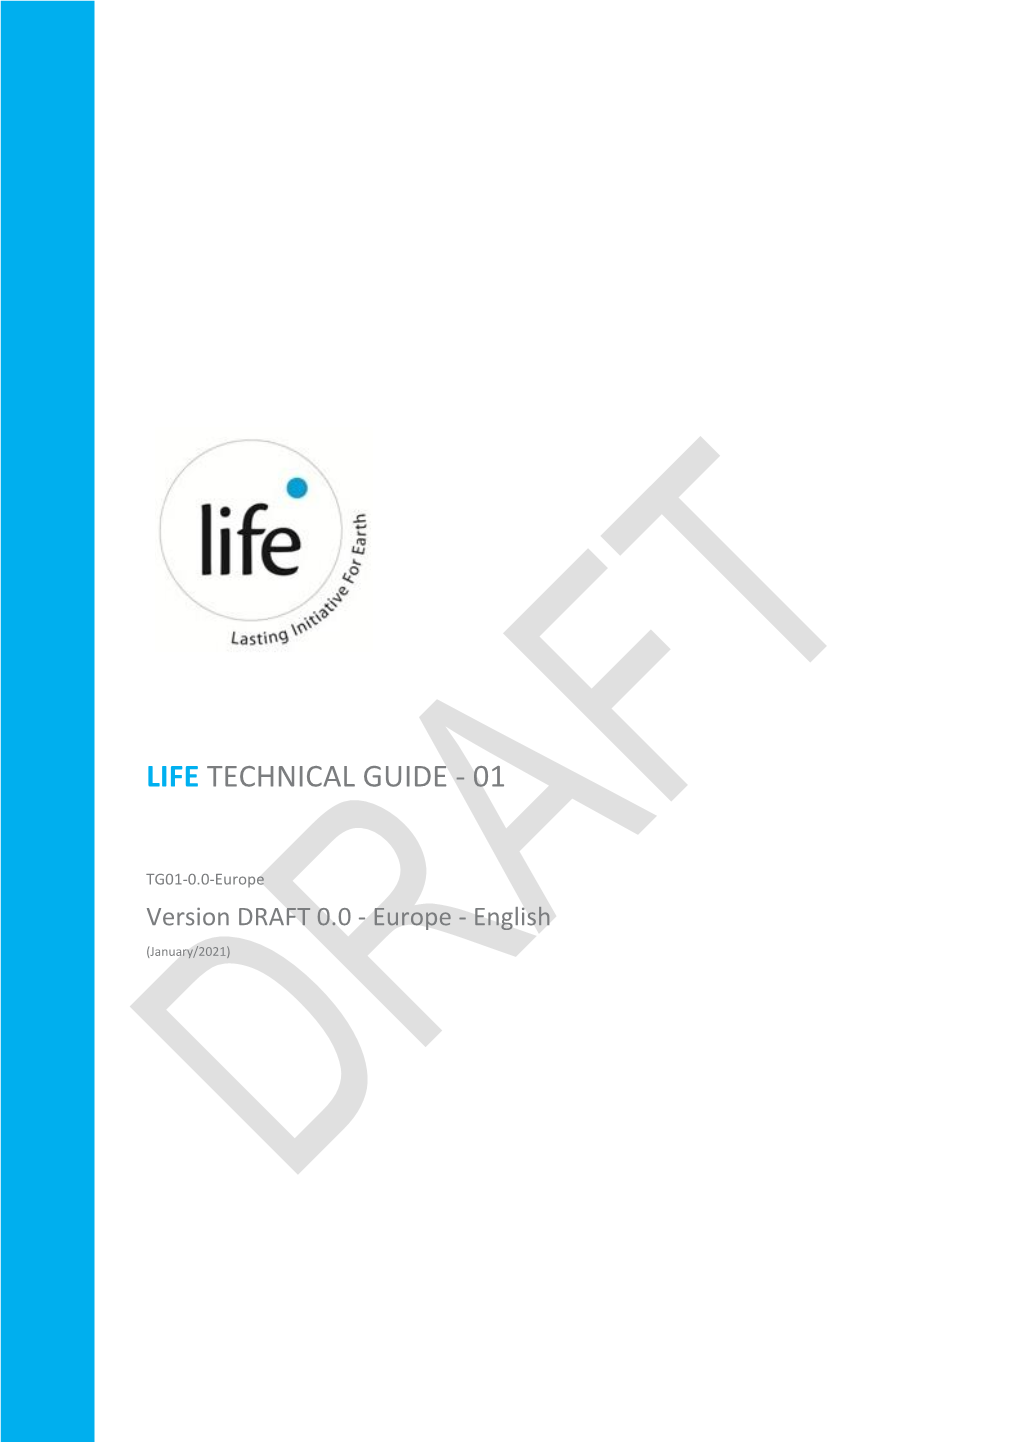 Life Technical Guide - 01